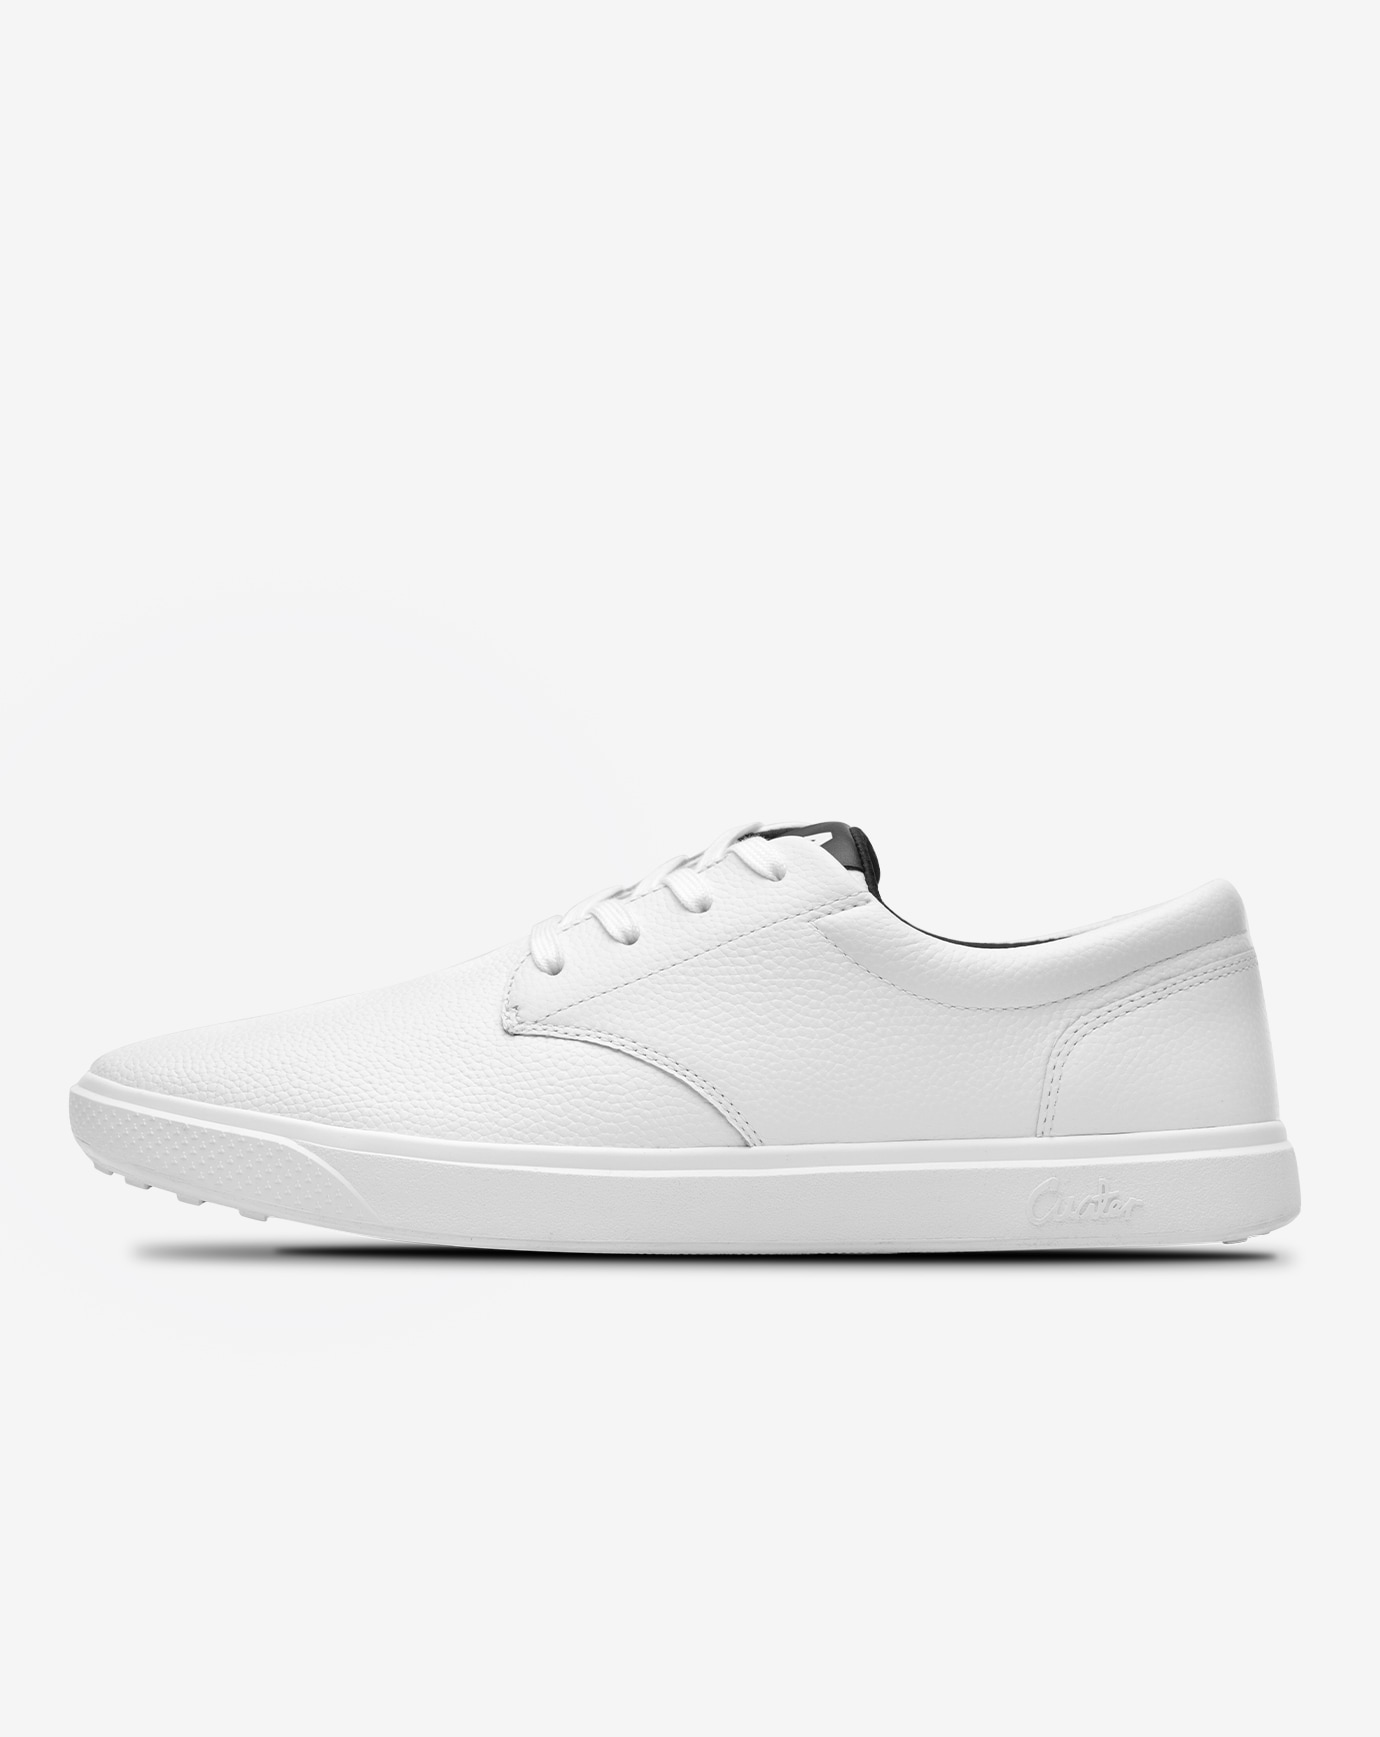 THE WILDCARD LEATHER SPIKELESS GOLF SHOE Image 1